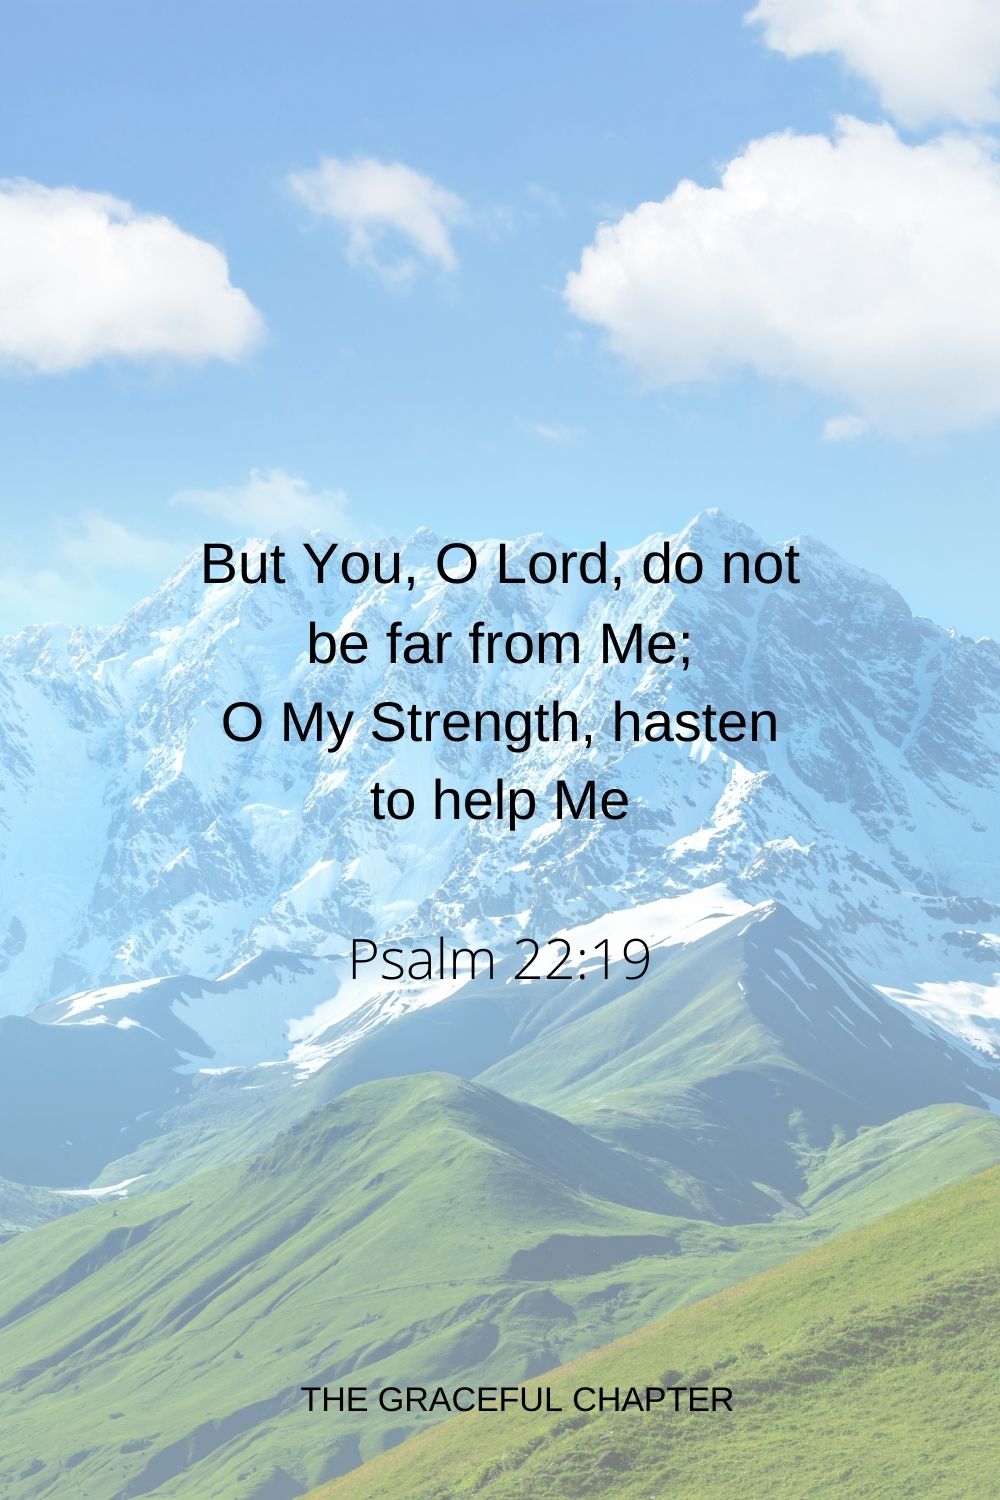 But You, O Lord, do not be far from Me; O My Strength, hasten to help Me Psalm 22:19